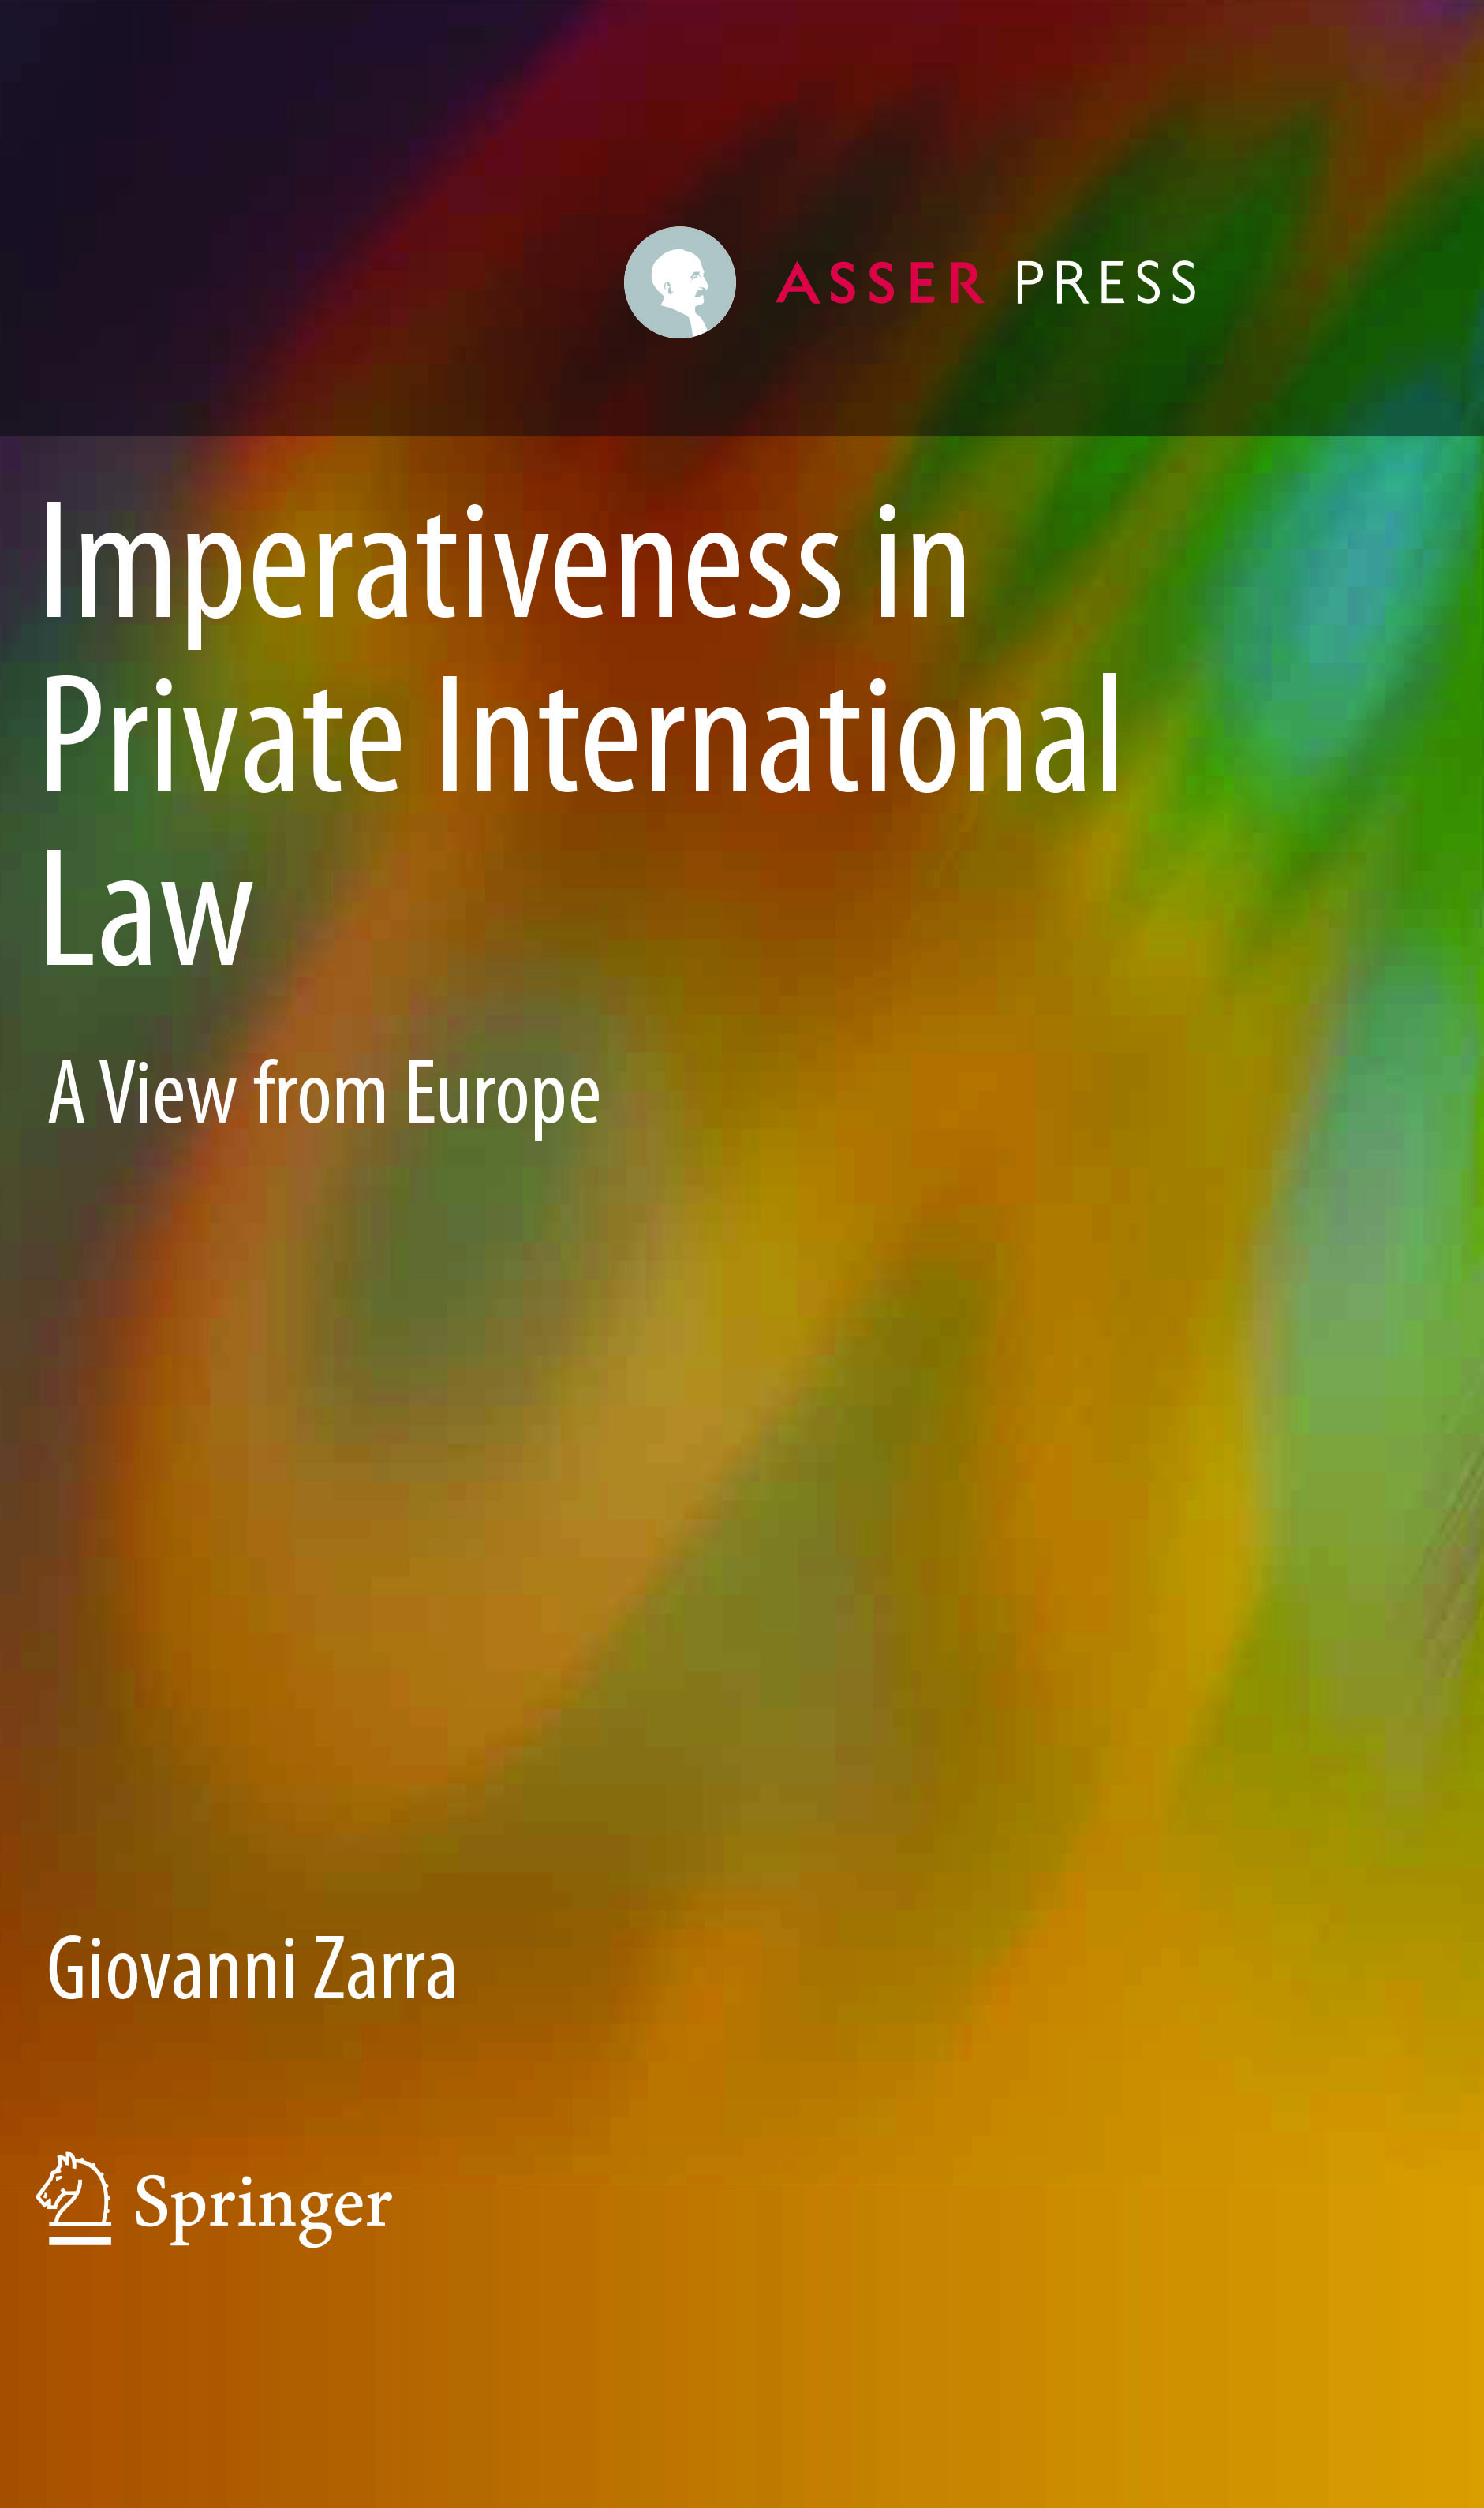 Imperativeness in Private International Law - A View from Europe